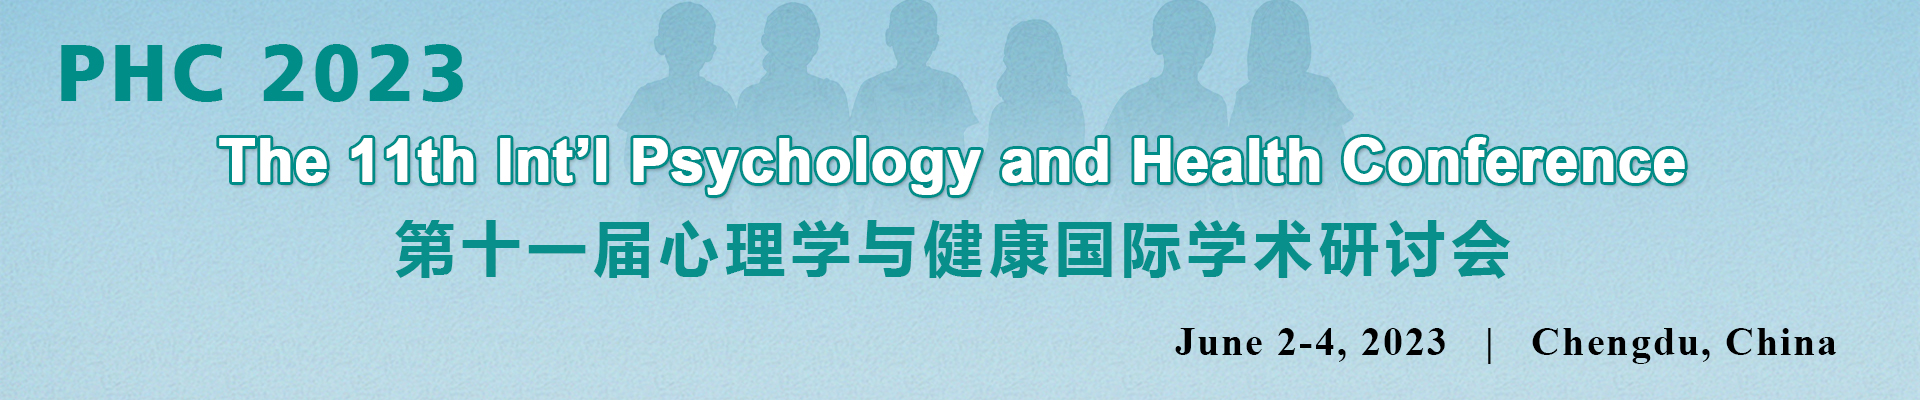 The 11th Int’l Psychology and Health Conference (PHC 2023), Chengdu, Sichuan, China